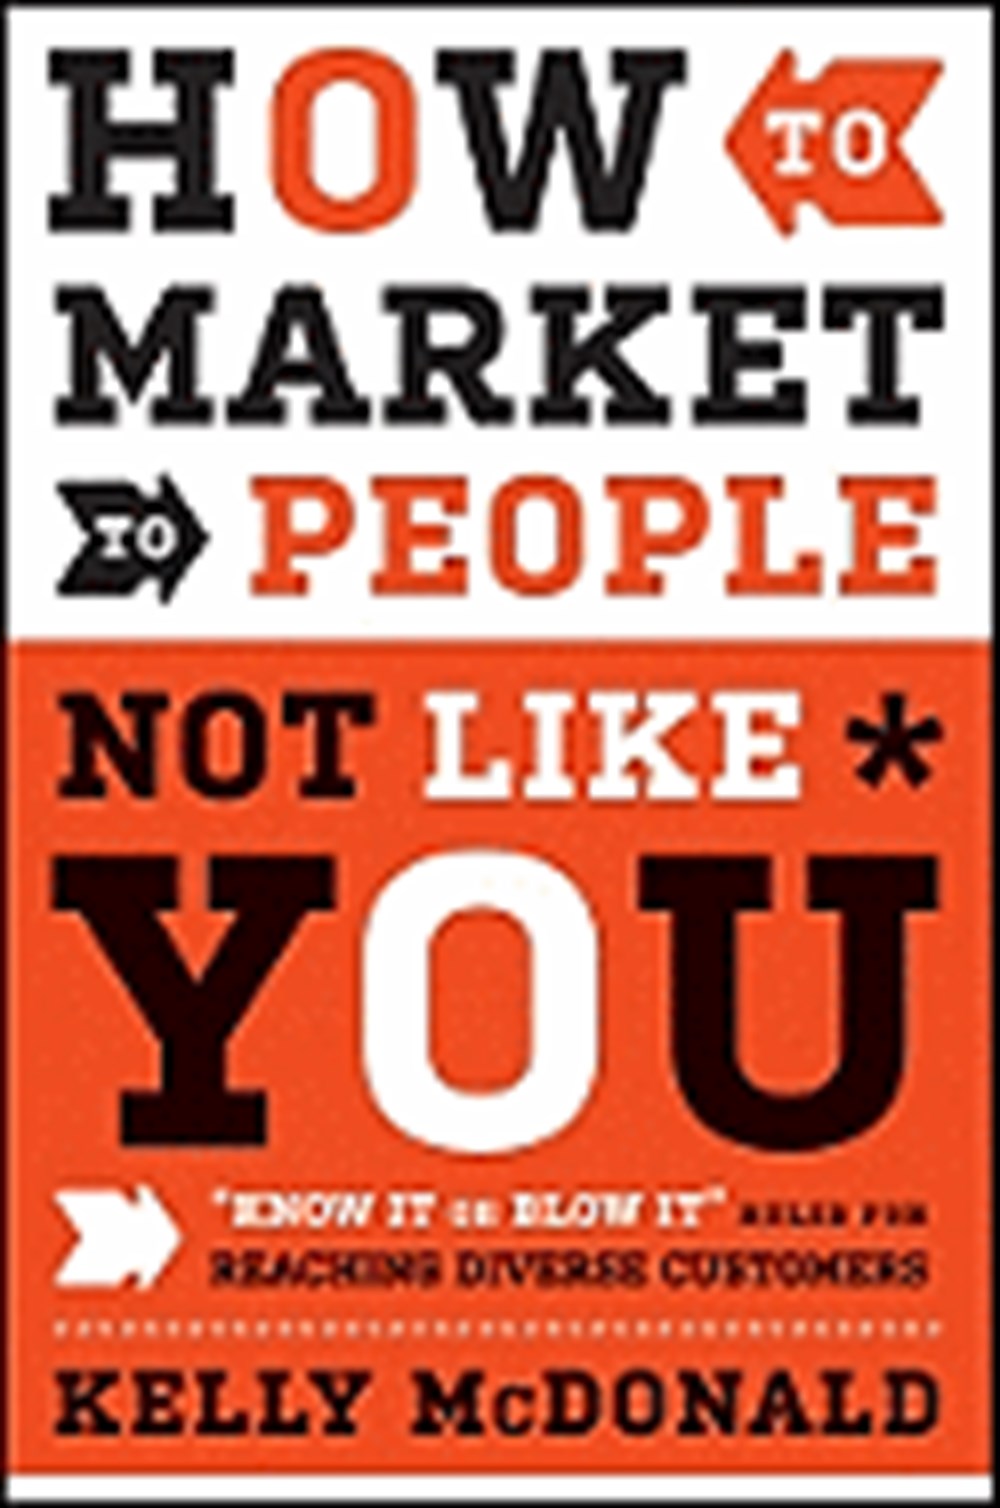 How to Market to People Not Like You "know It or Blow It" Rules for Reaching Diverse Customers